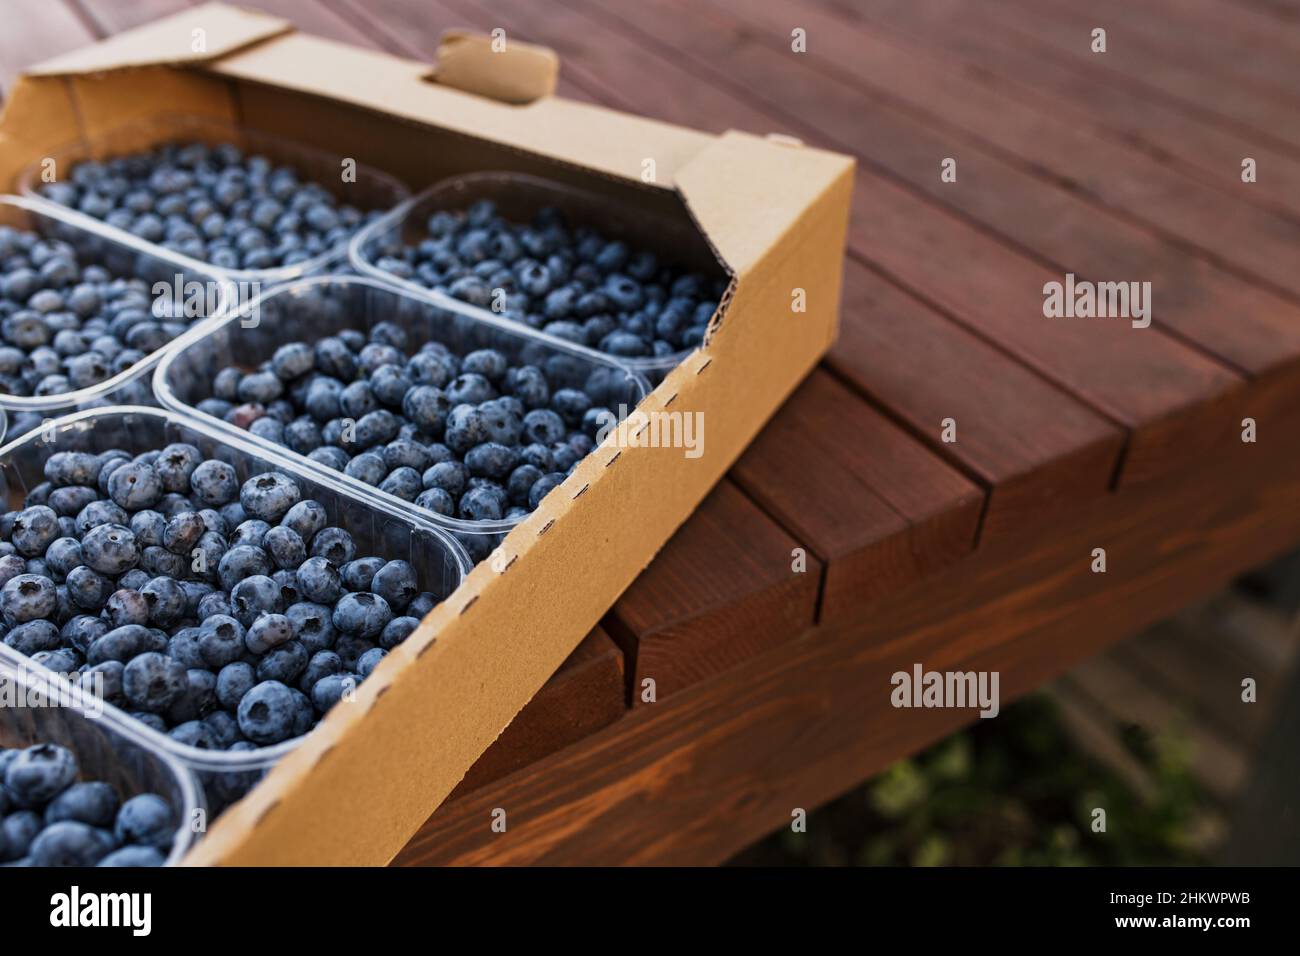 Box, crate or container with collected fresh blueberries. Berries agriculture business. Farmer cultivating and harvesting blueberry. Horticulture industry. Brown wooden boards background Stock Photo